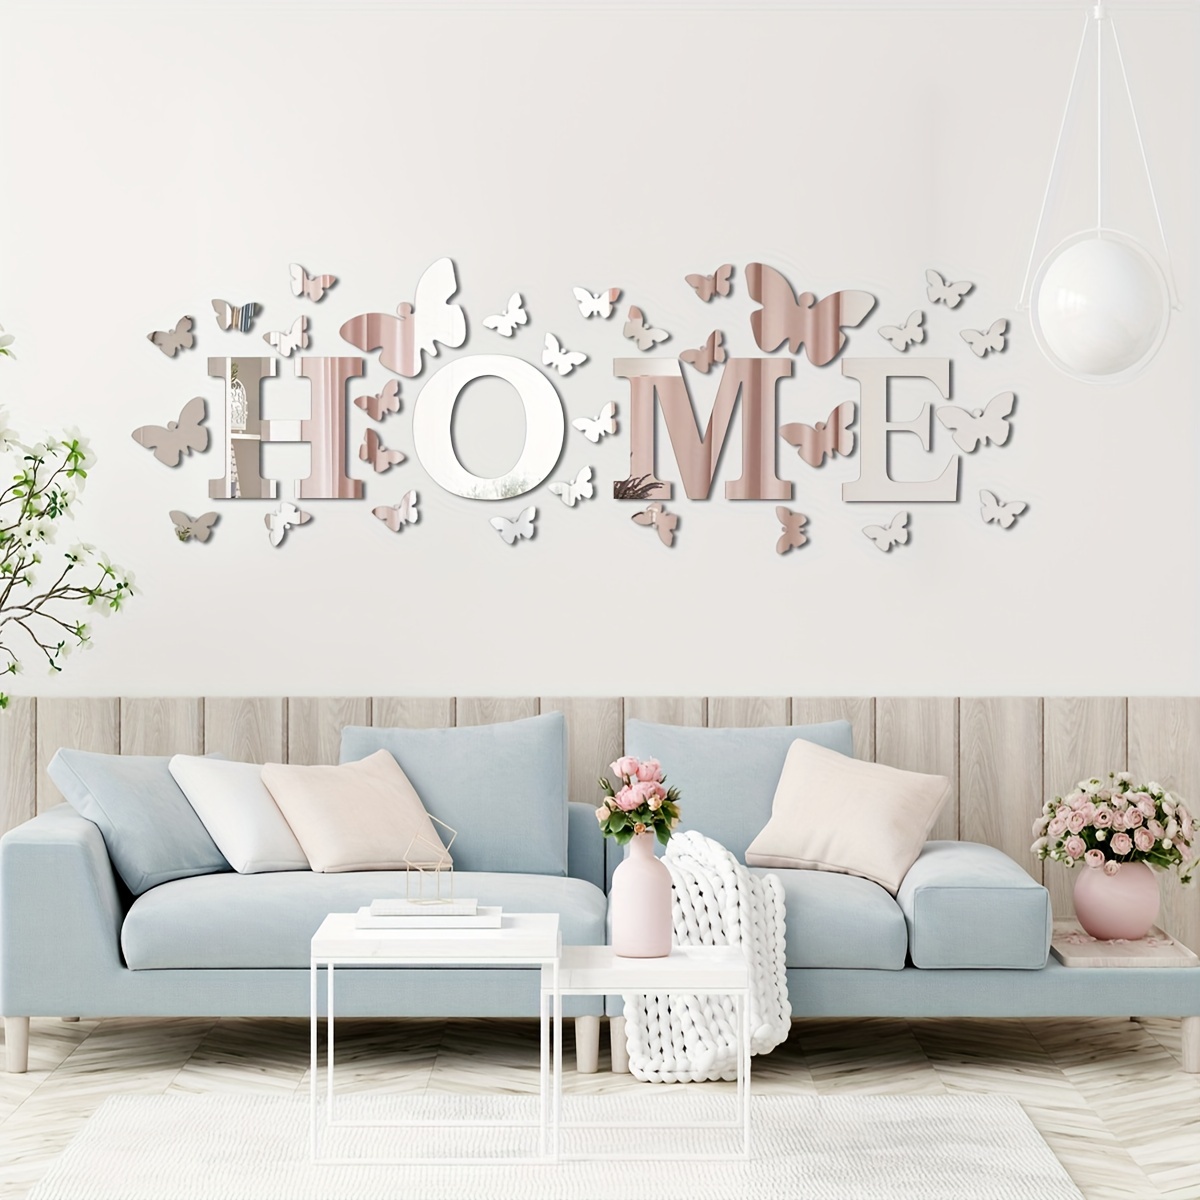 Wavy Mirror Wall Stickers, 12PCS Full Length 3D Mirrors Art DIY Home  Decorative Acrylic Mirror Wall Sheet Plastic Mirror Tiles for Home Living  Room